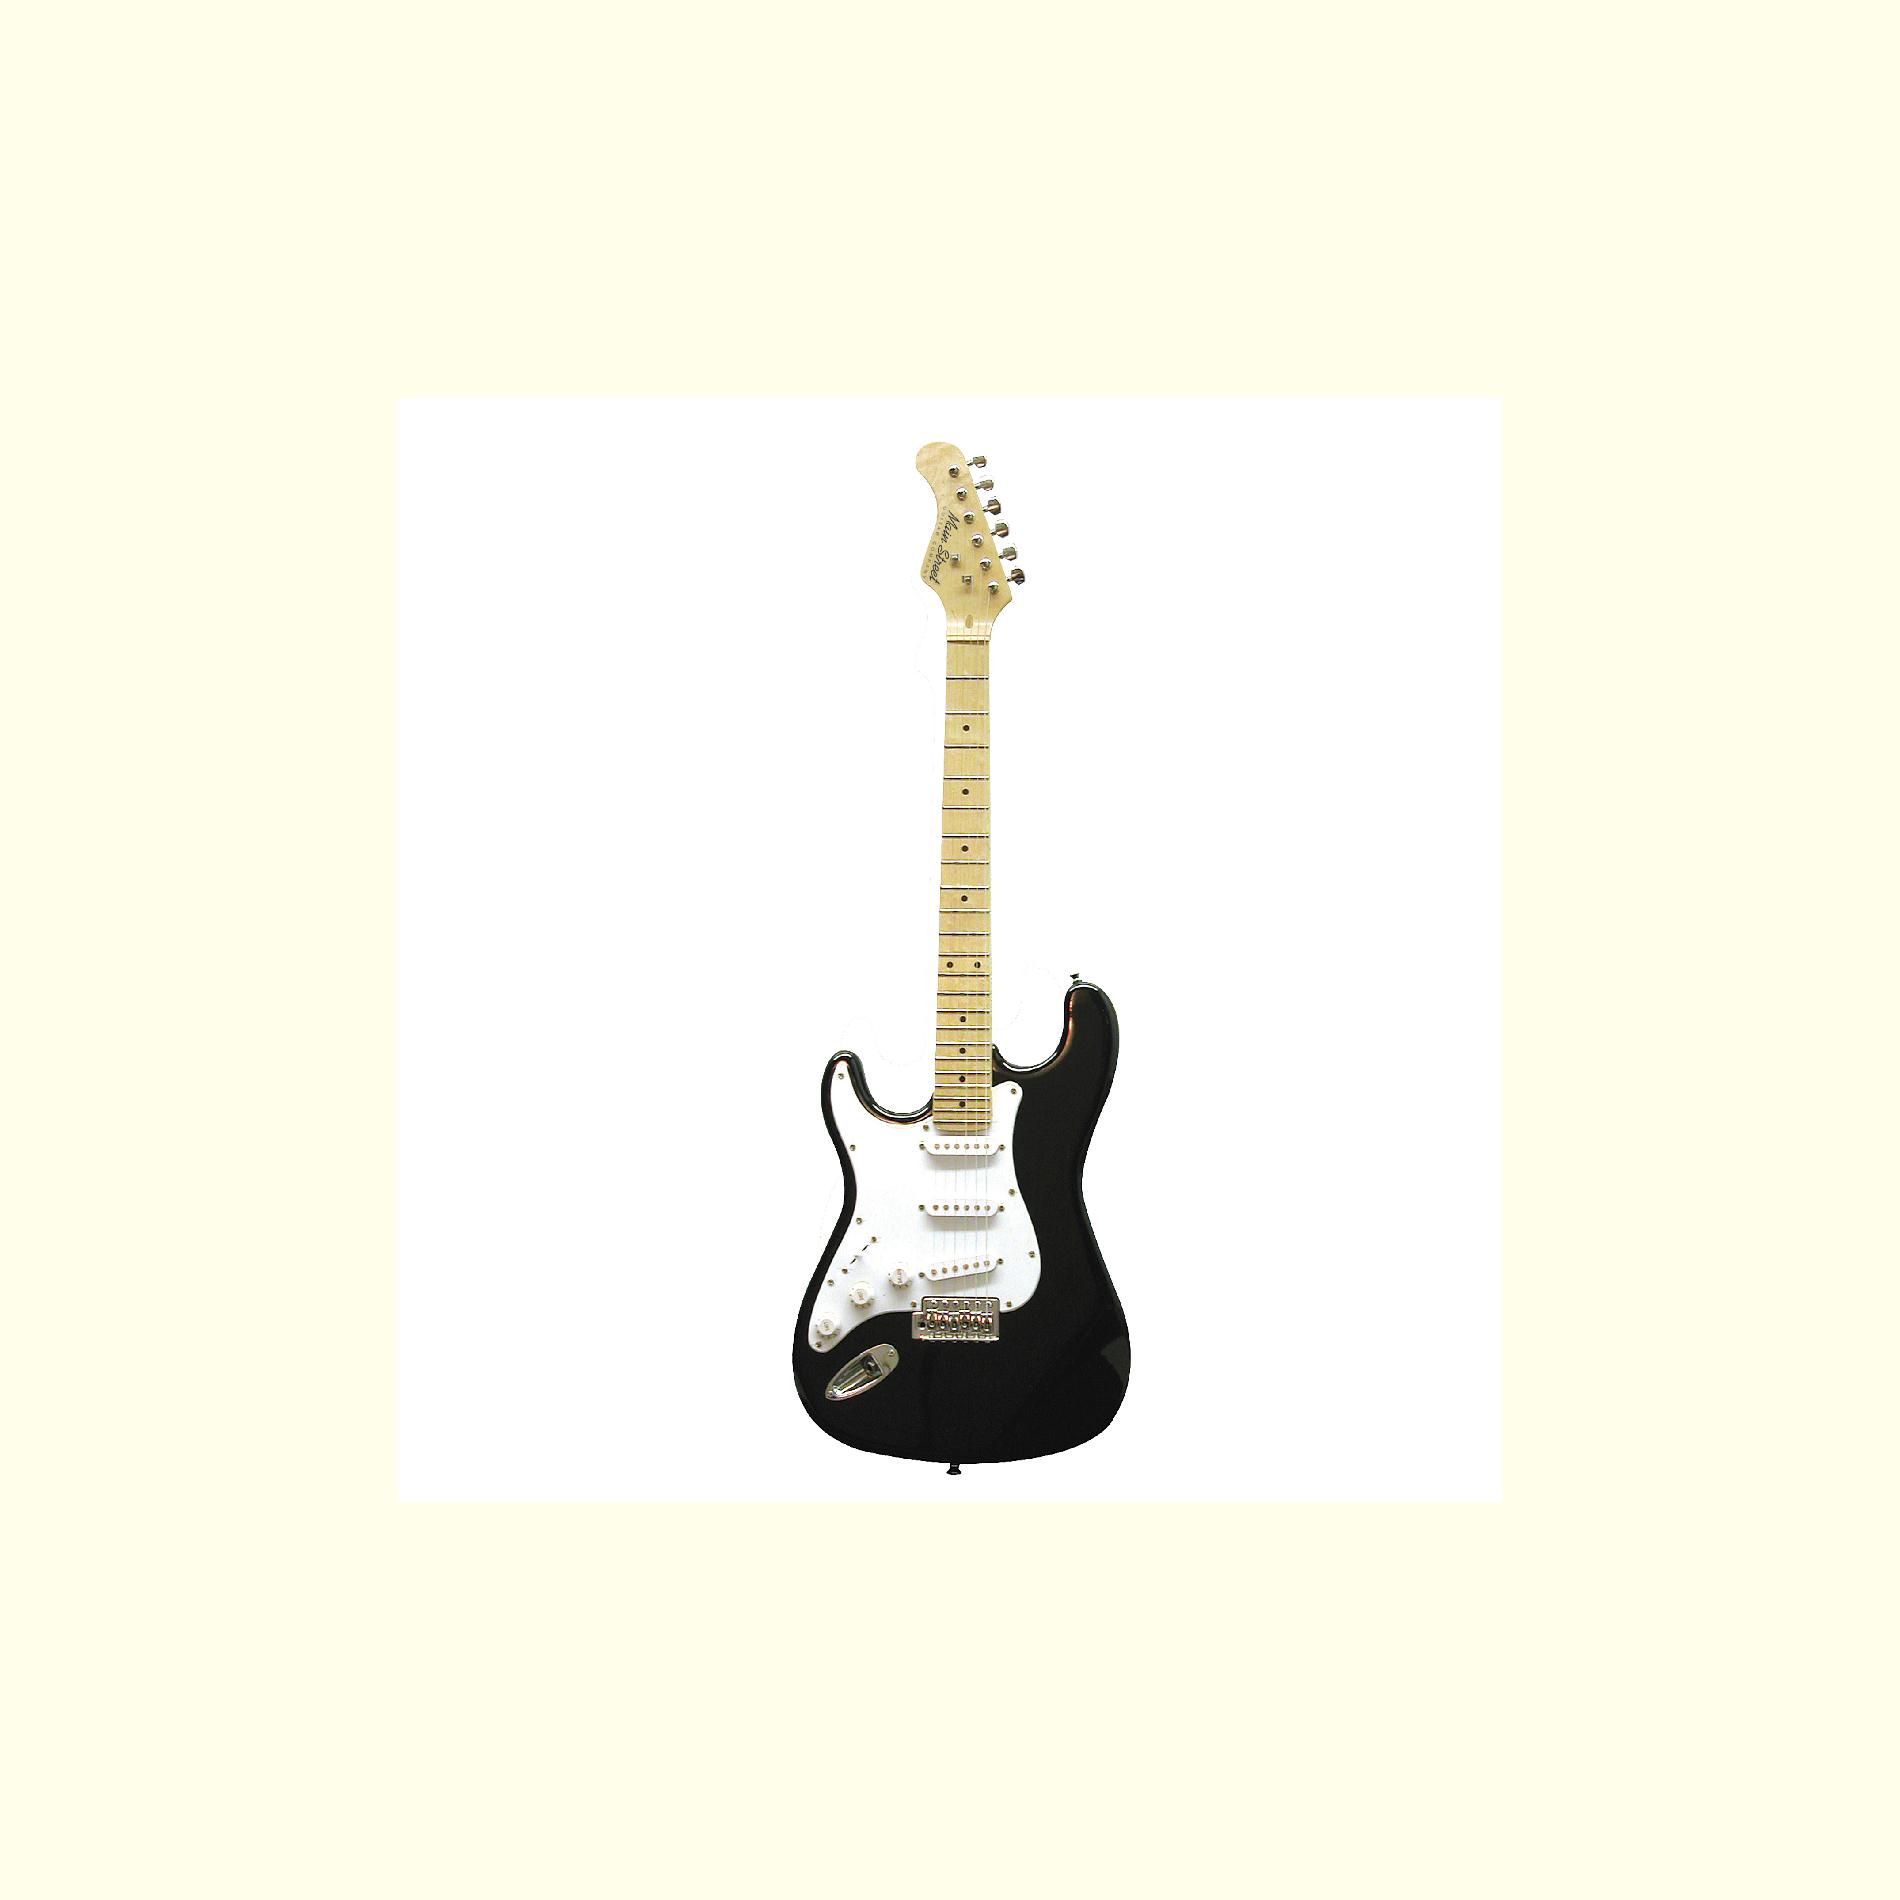 Main Street Left Handed Double Cutaway Guitar with Black Laminated body